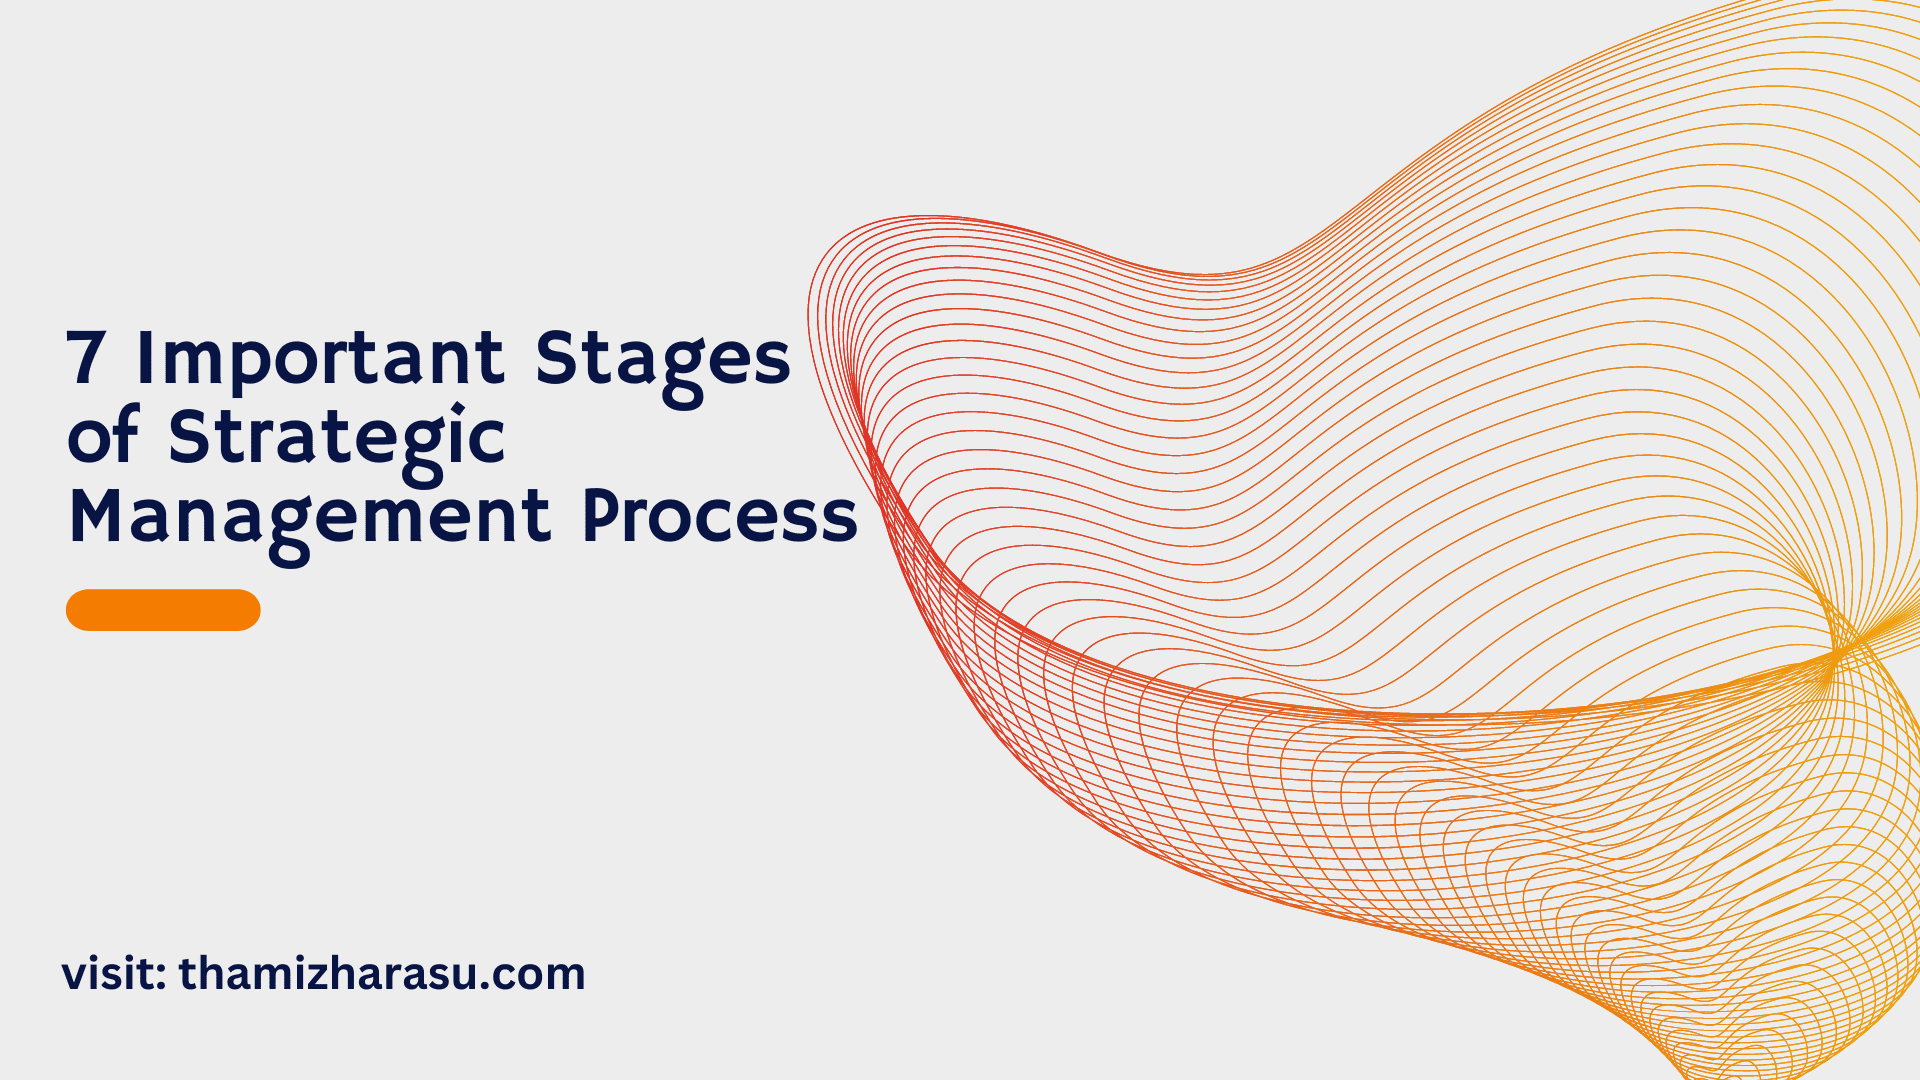 7 Important Stages of Strategic Management Process